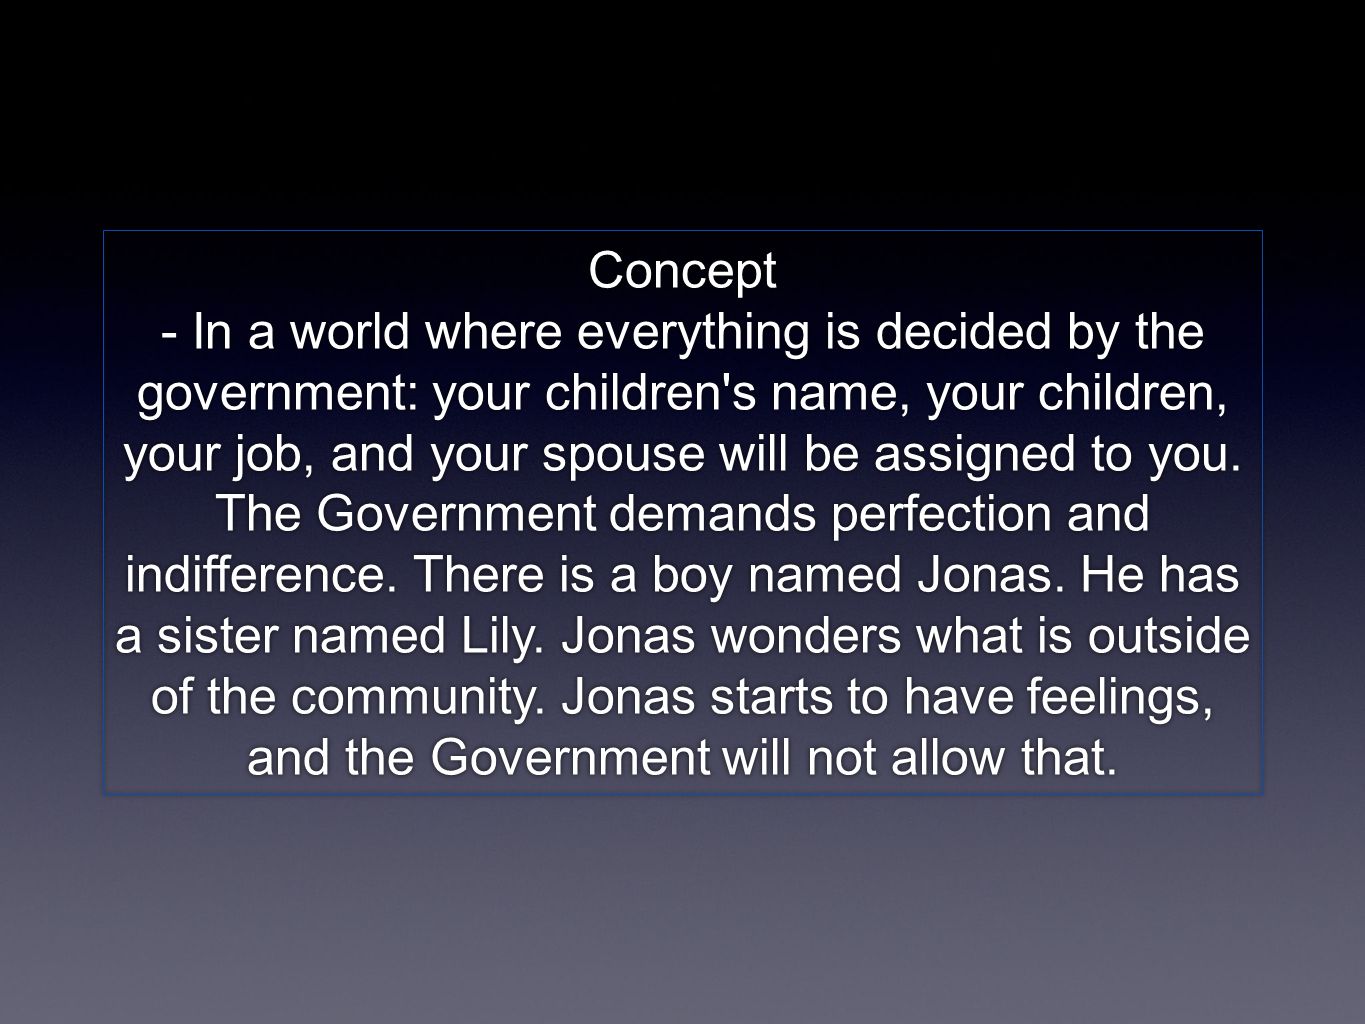 Concept - In a world where everything is decided by the government: your children s name, your children, your job, and your spouse will be assigned to you.